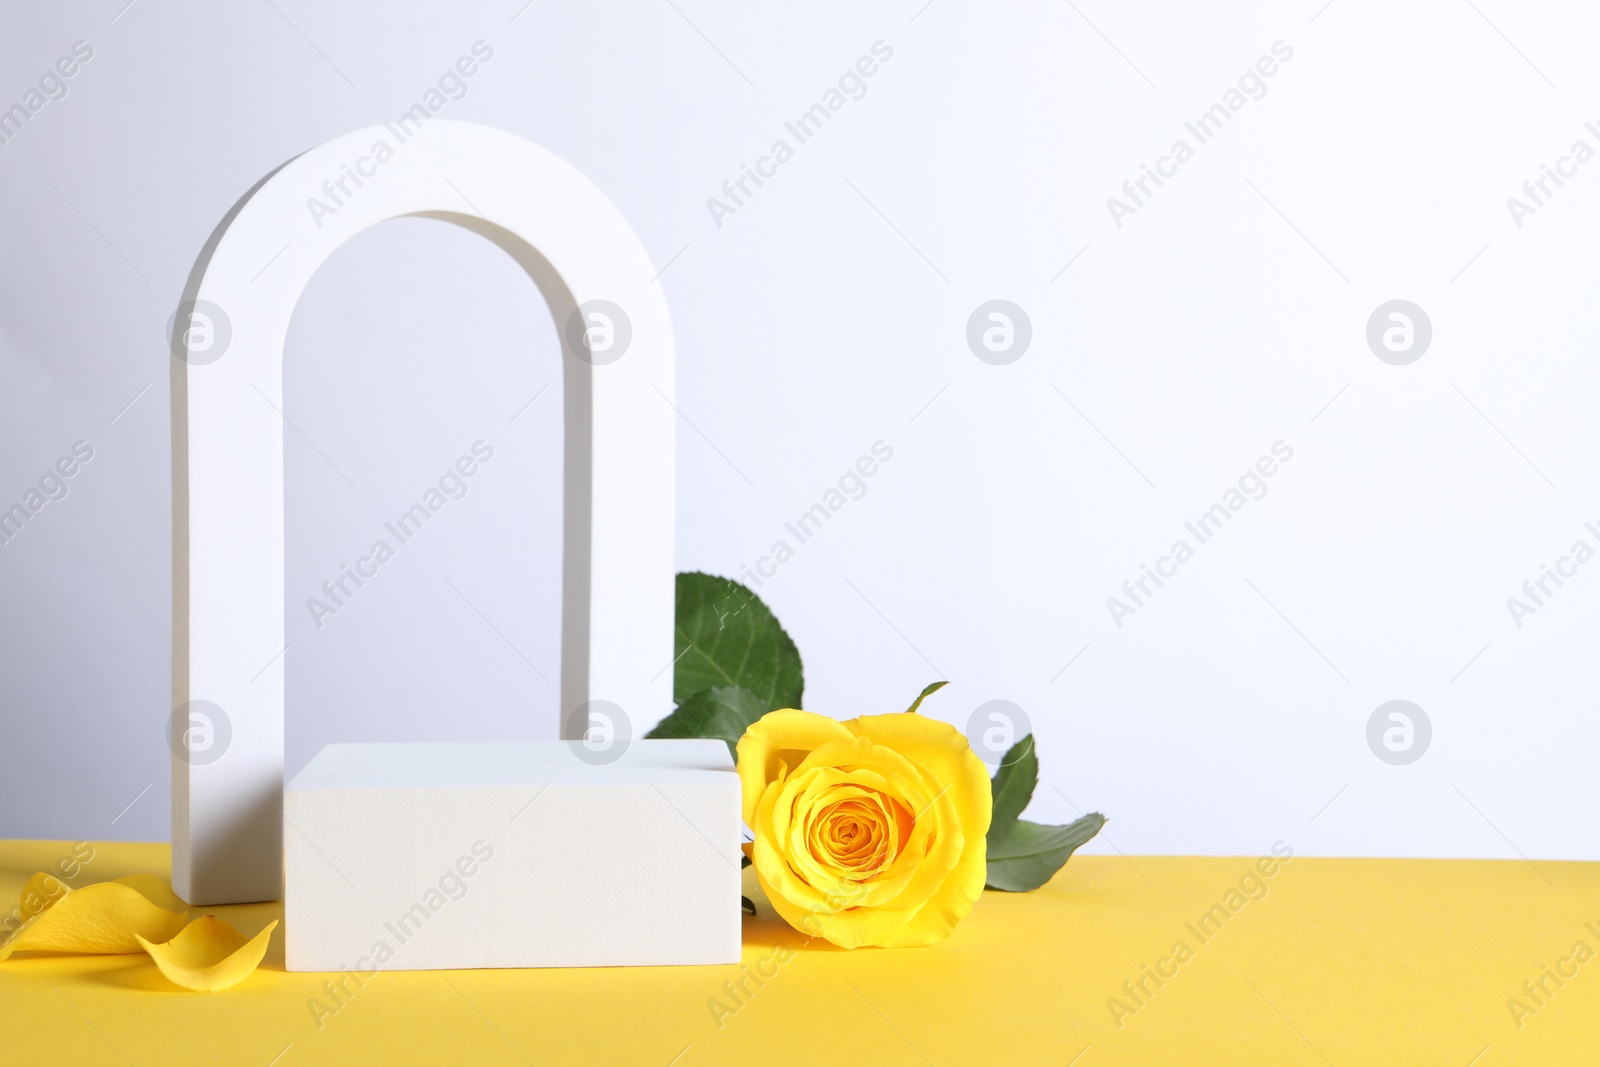 Photo of Beautiful presentation for product. Geometric figures and rose on yellow table against white background, space for text